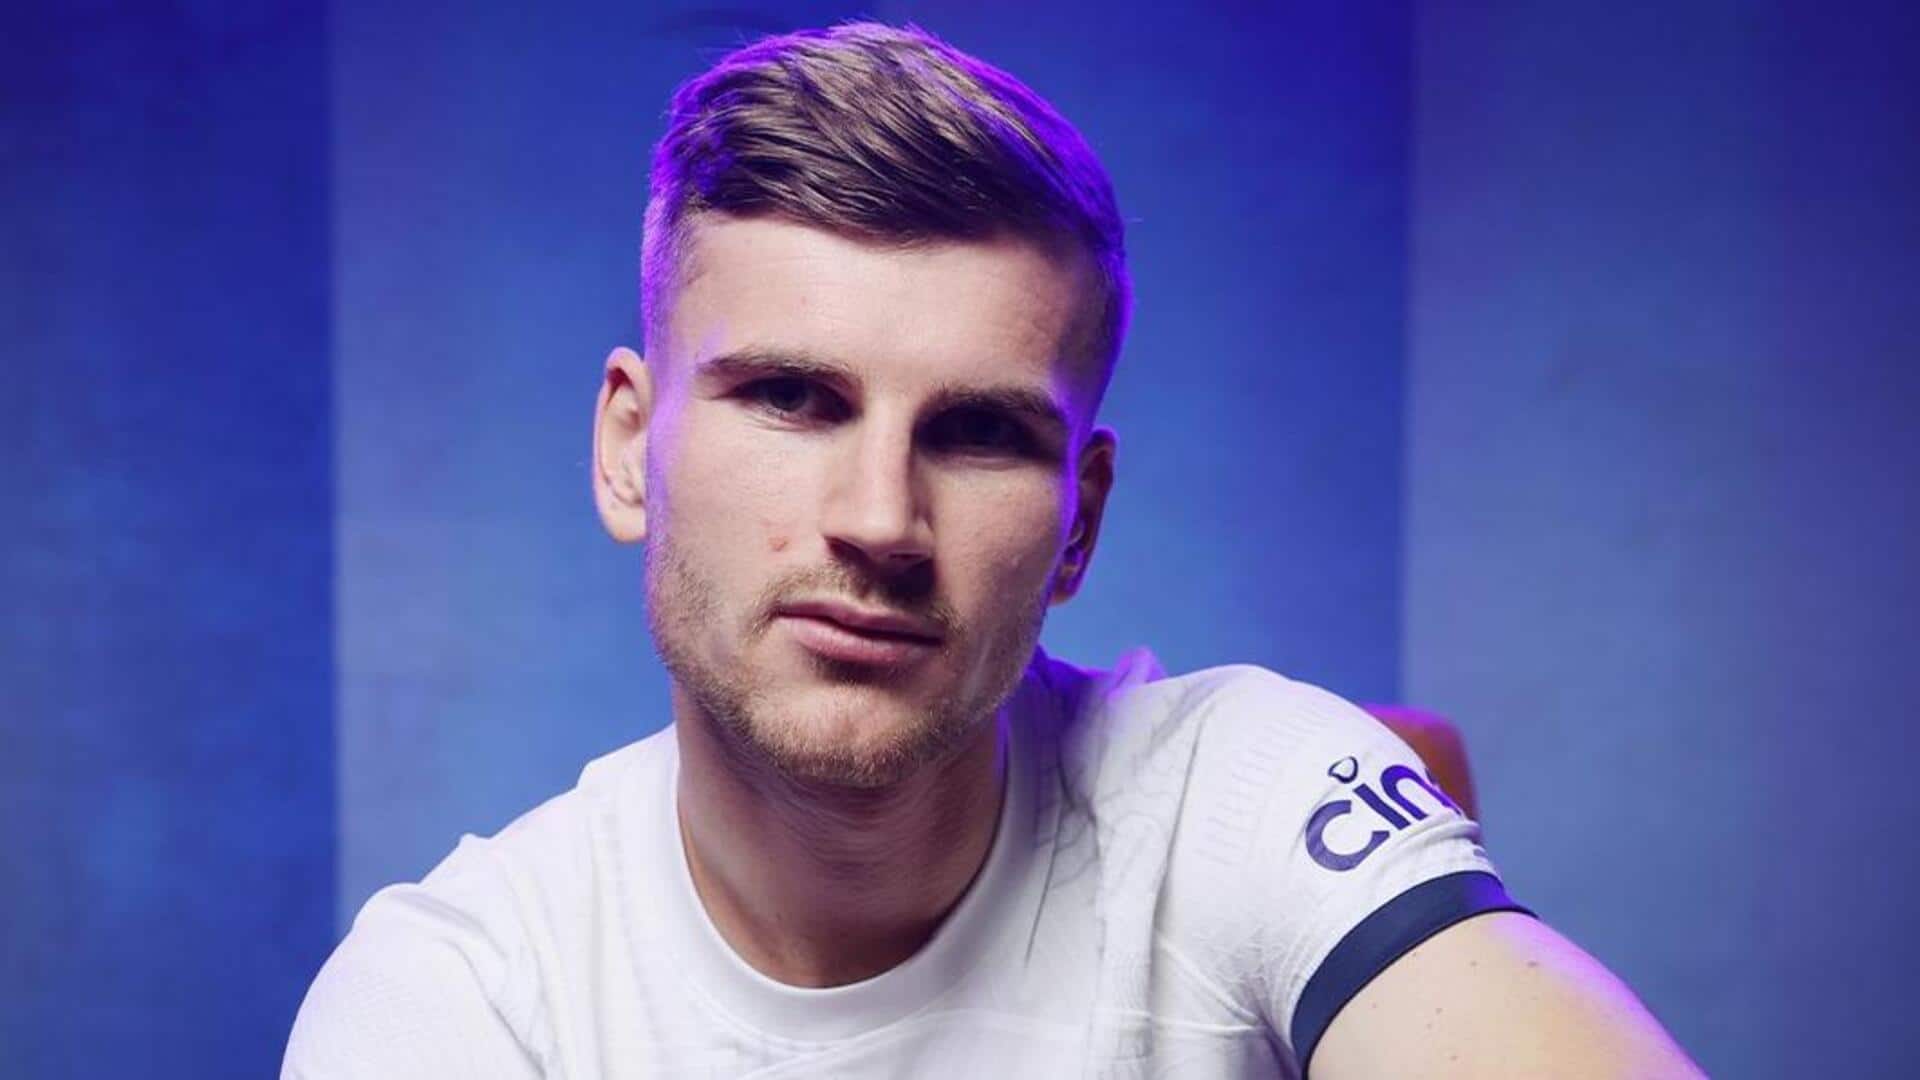 Tottenham sign Leipzig's Timo Werner on loan: Decoding his stats